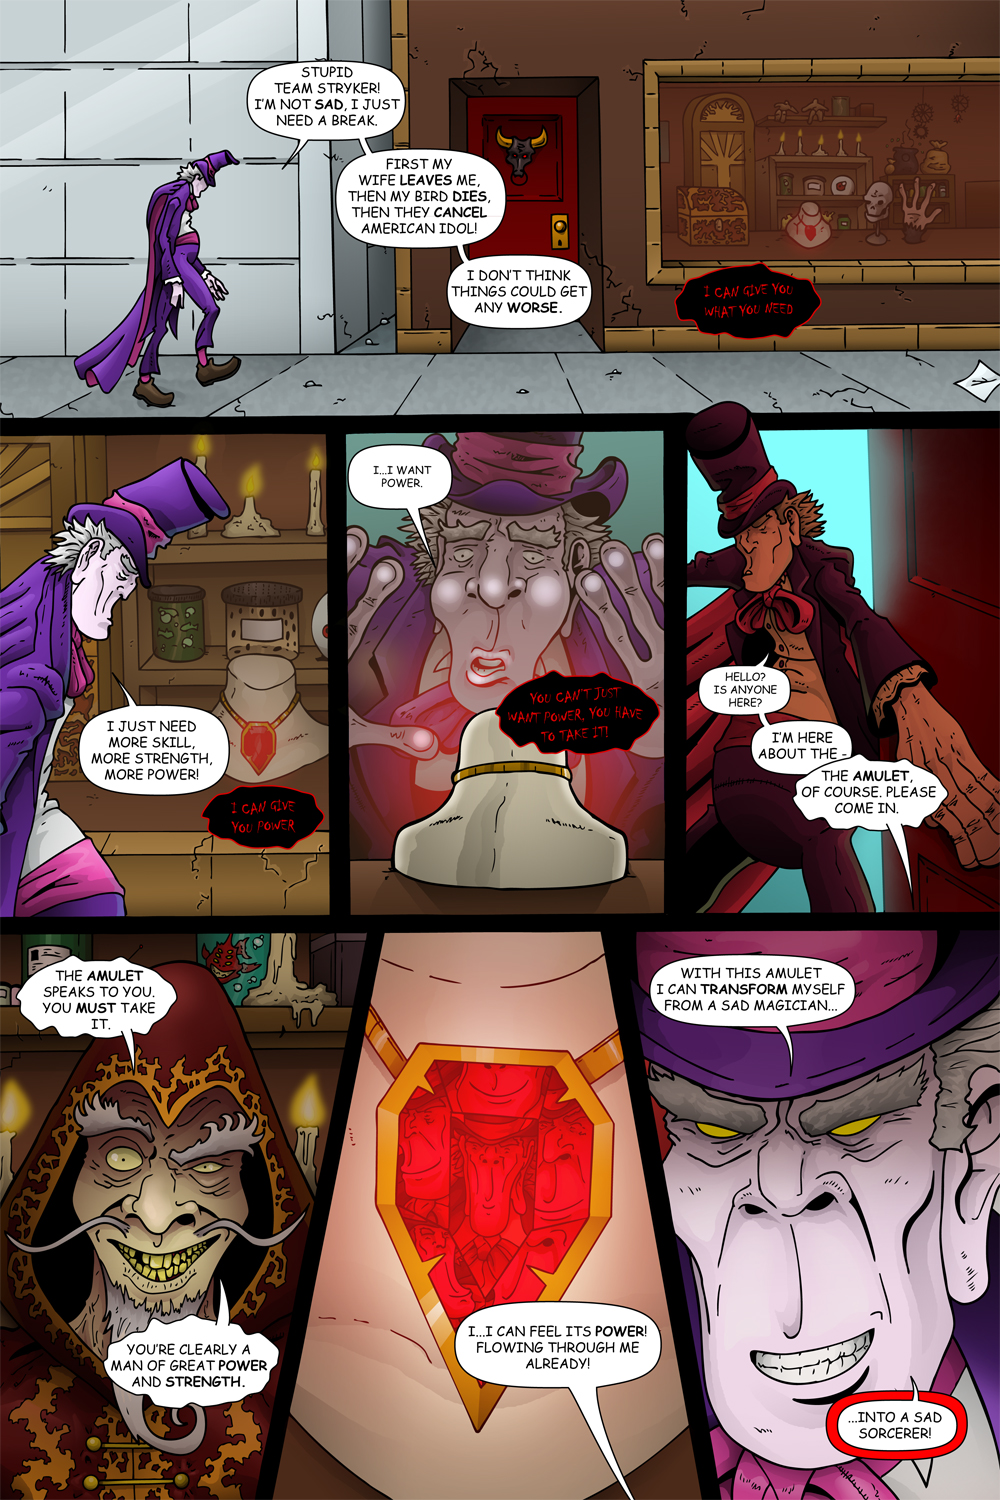 MISSION 008: PAGE 07 “I WANT POWER”